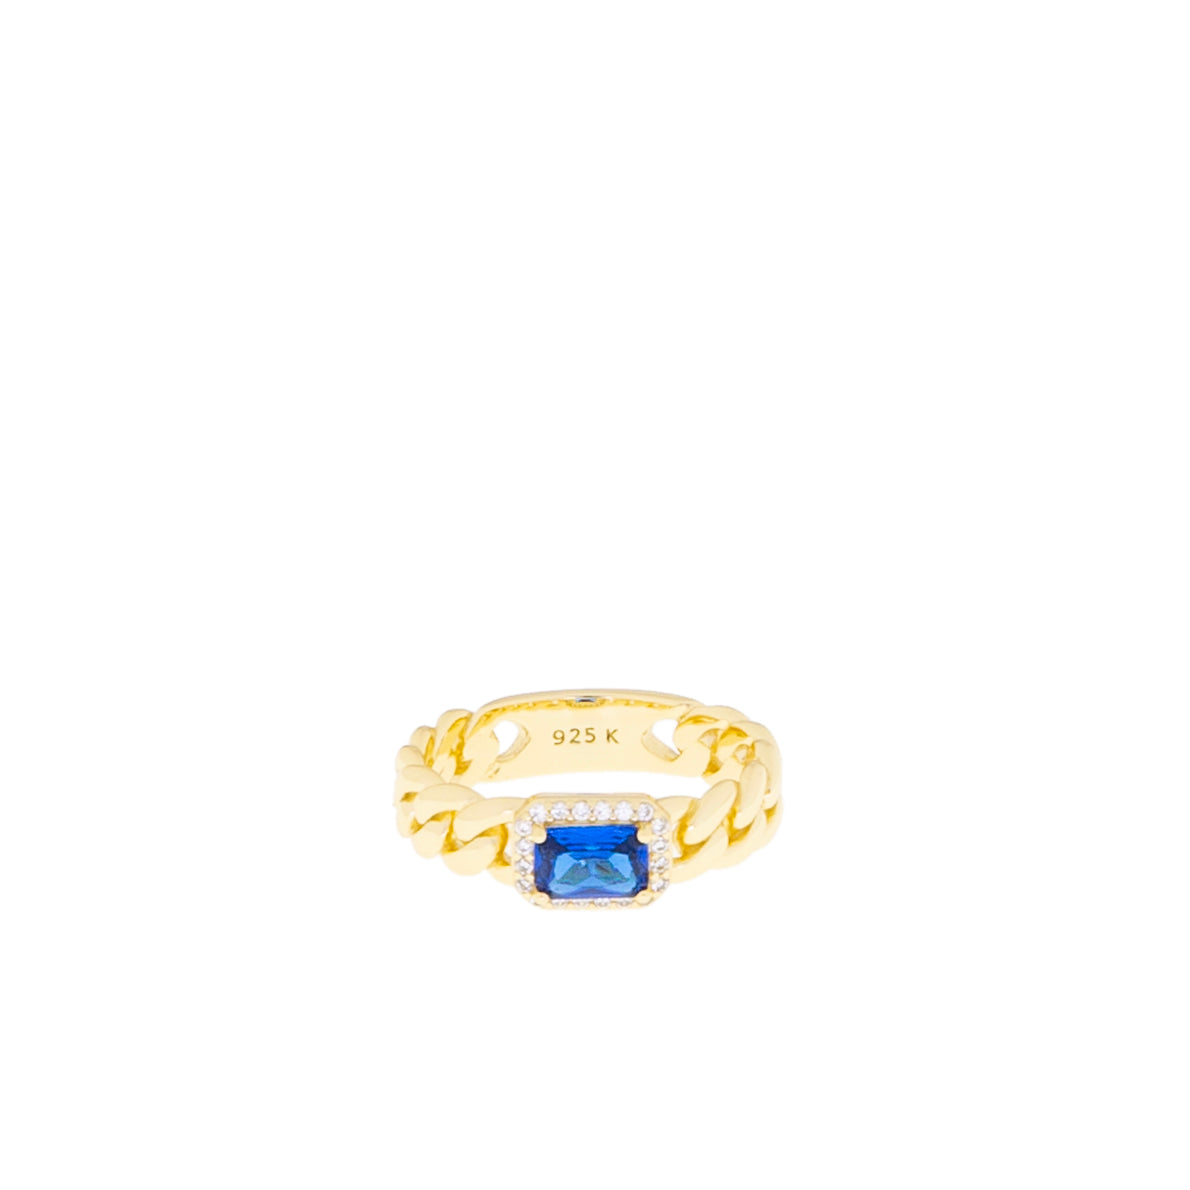 sterling silver/ gold plated braided emerald cut stone ring